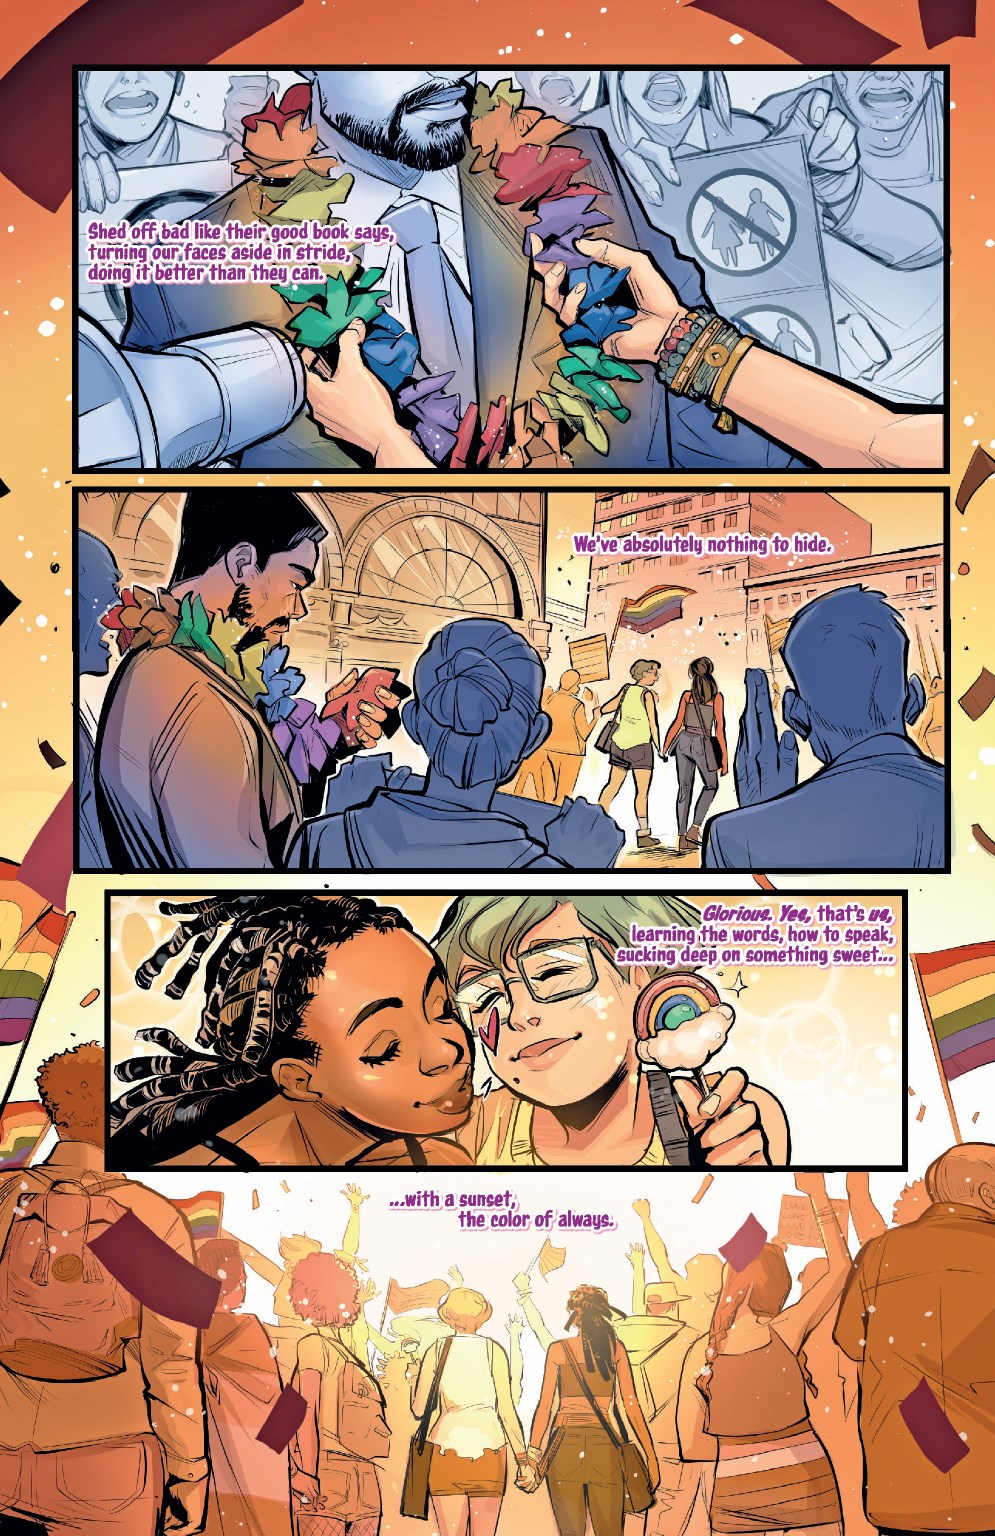 The Color of Always: An Lgbtqia+ Love Anthology